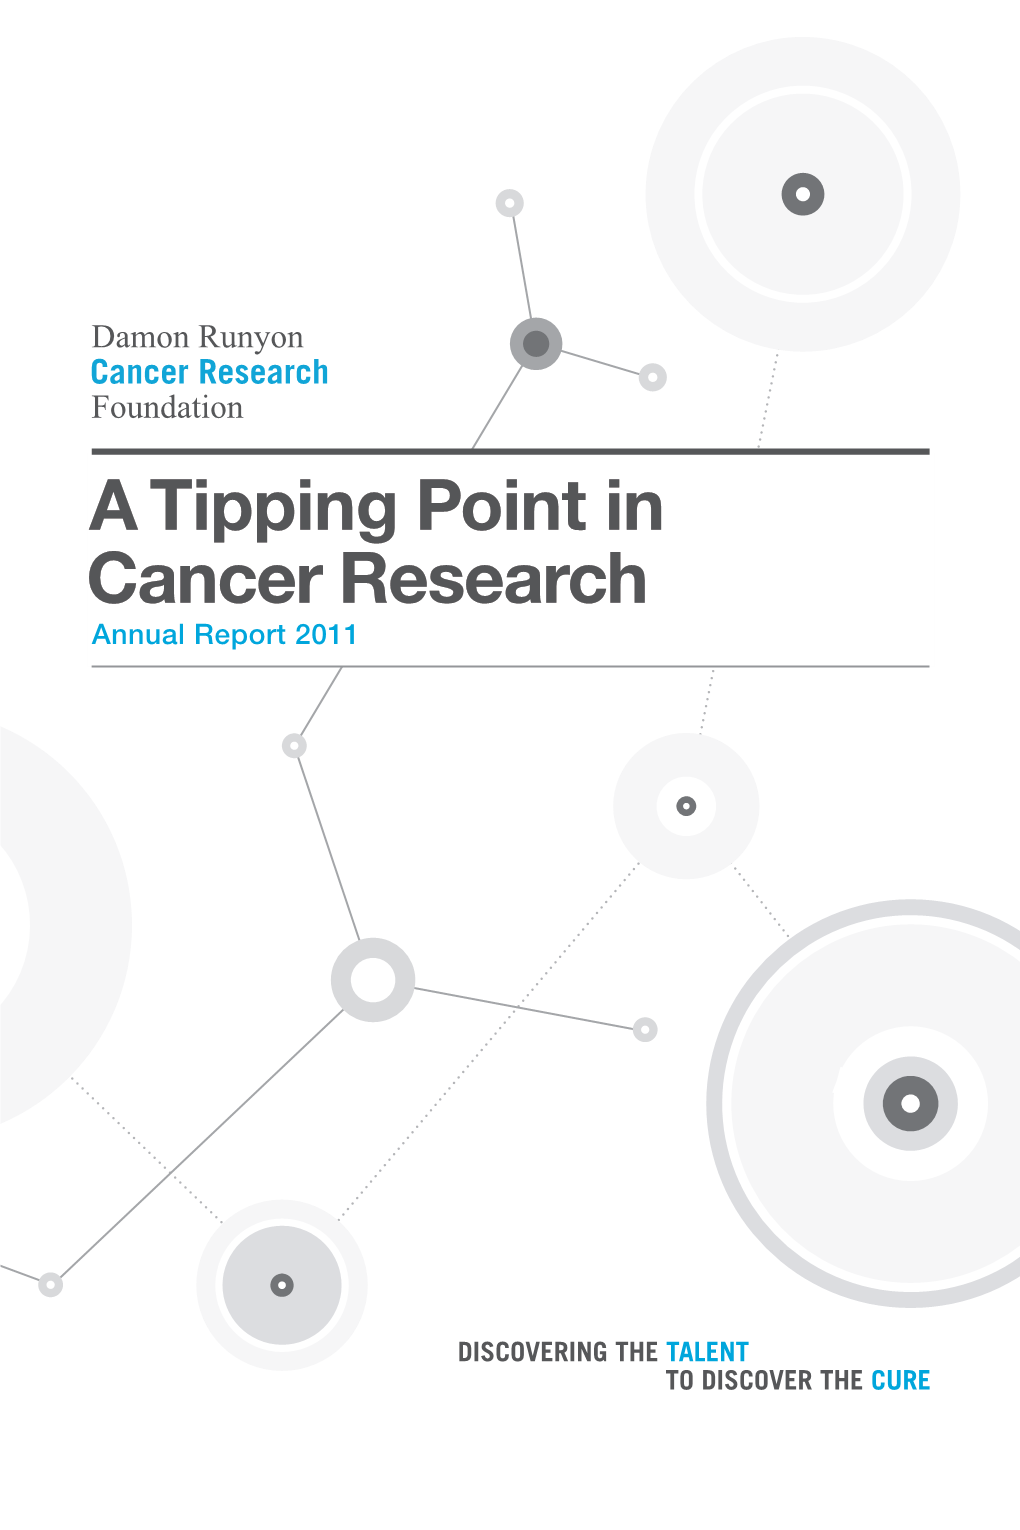 A Tipping Point in Cancer Research